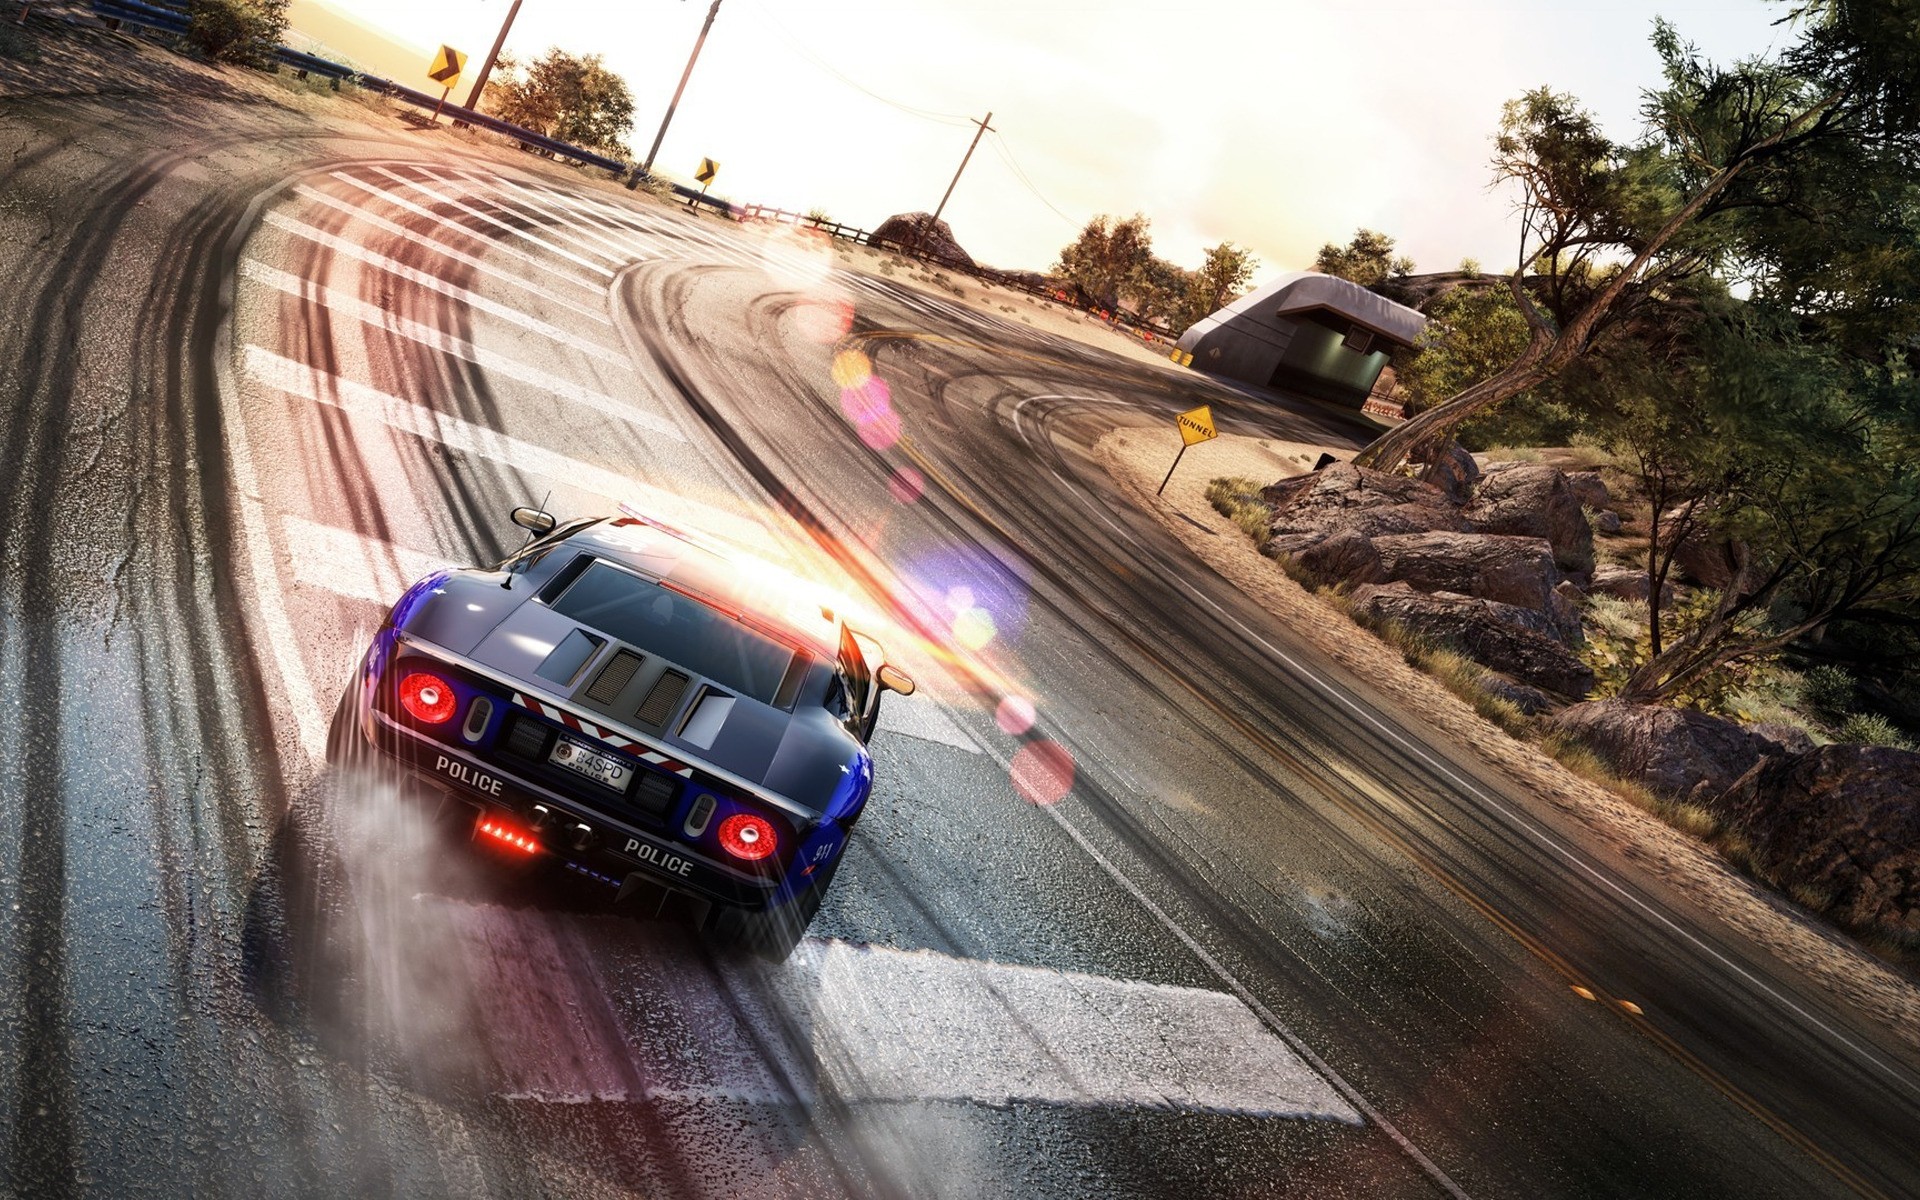 Speed car racing. Need for Speed дрифт. Ford gt40 NFS. Need for Speed hot Pursuit Ford Shelby gt500. Нфс асфальт 9.